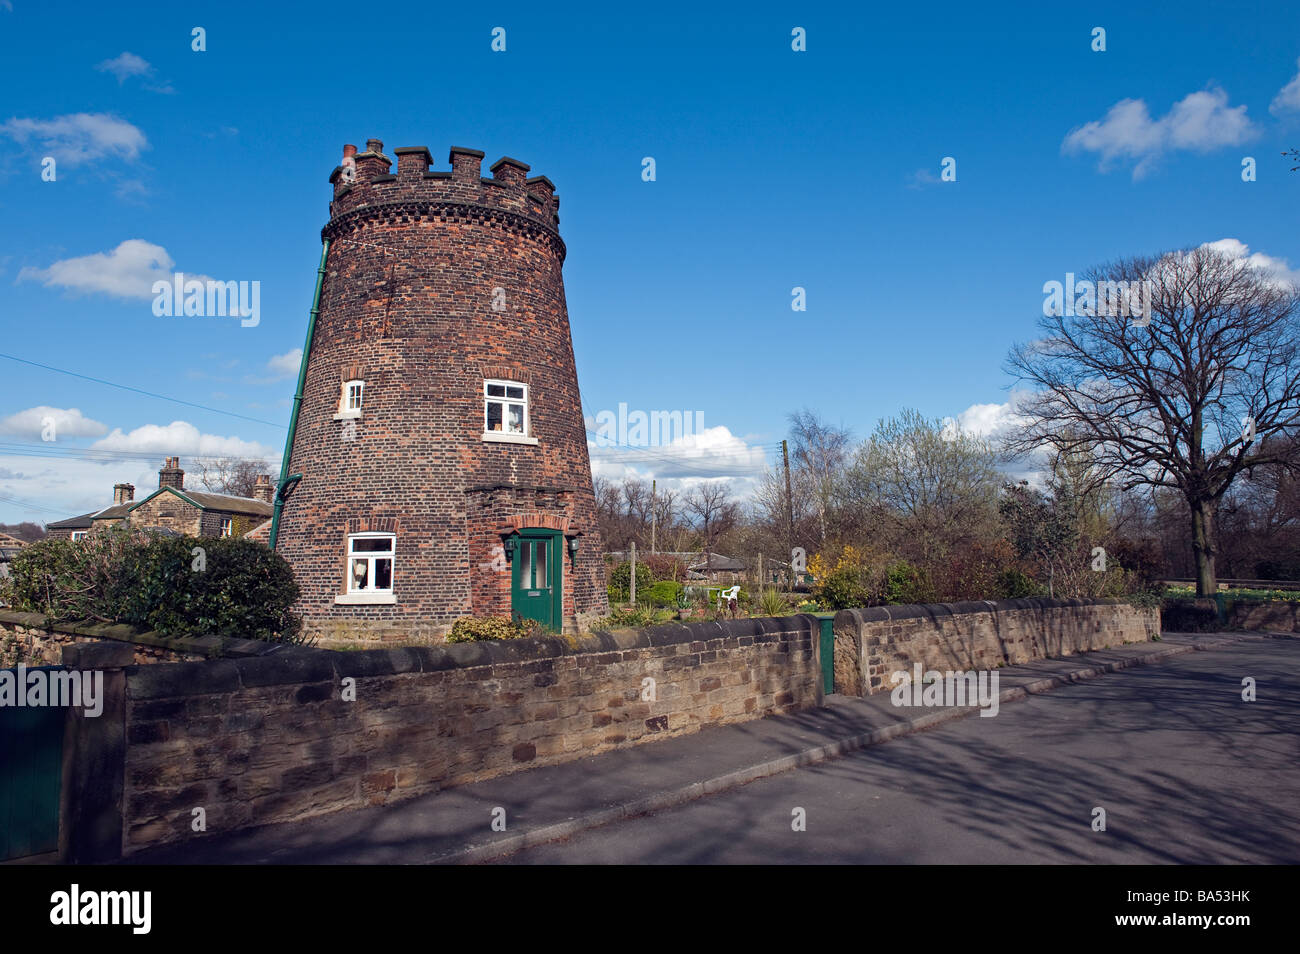 'The Round House' on 'Clayfield Lane' at Wentworth, 'South Yorkshire',England,'Great Britain' 'United Kingdom', Stock Photo